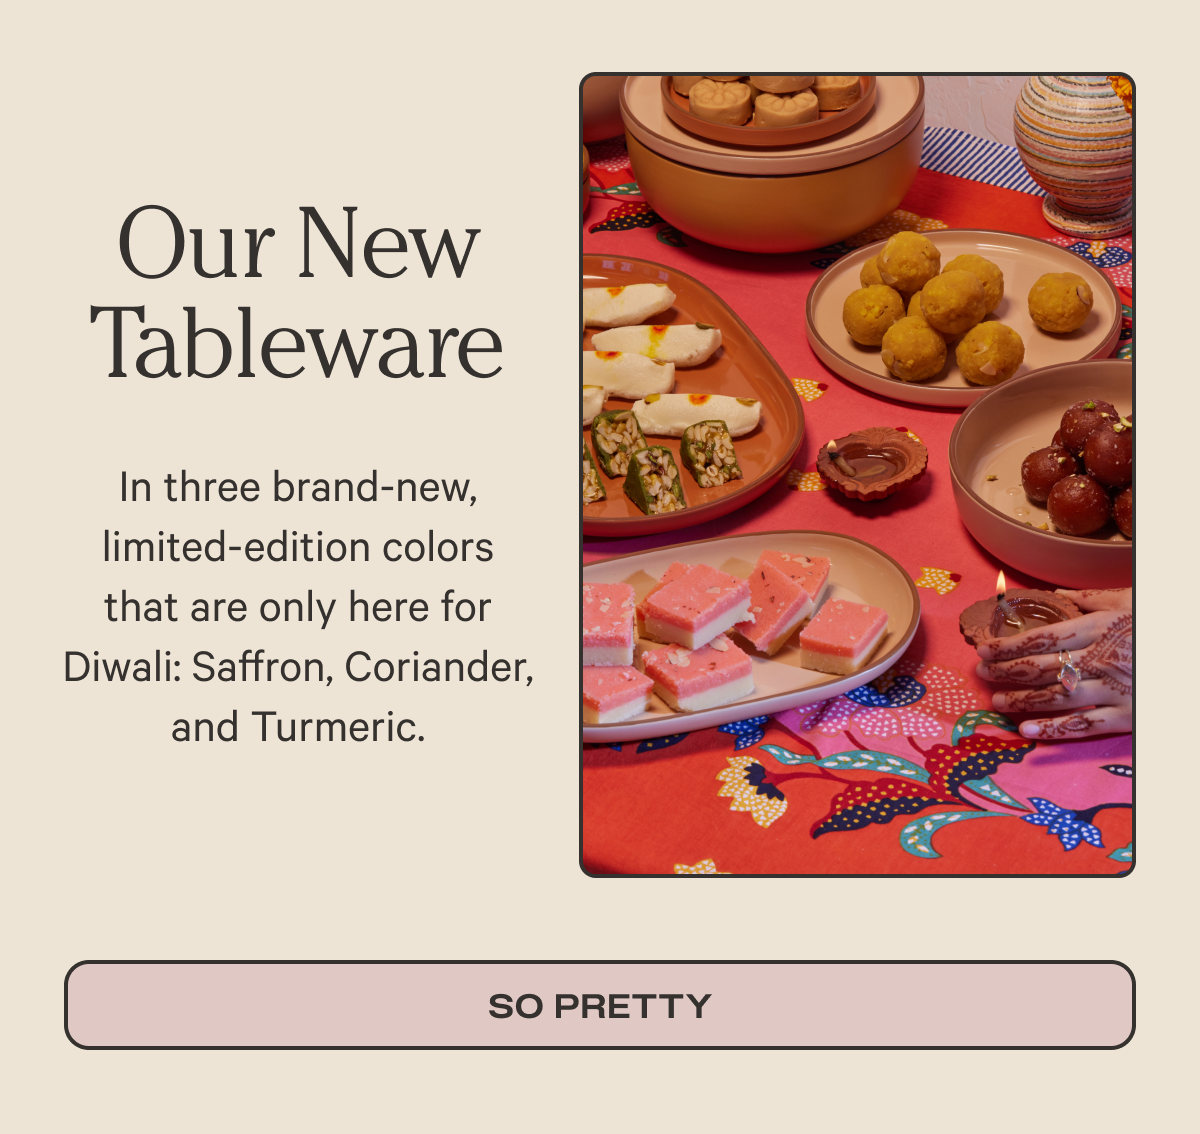 Our New Tableware In three brand-new, limited-edition colors that are only here for Diwali: Saffron, Coriander, and Turmeric. | So Pretty